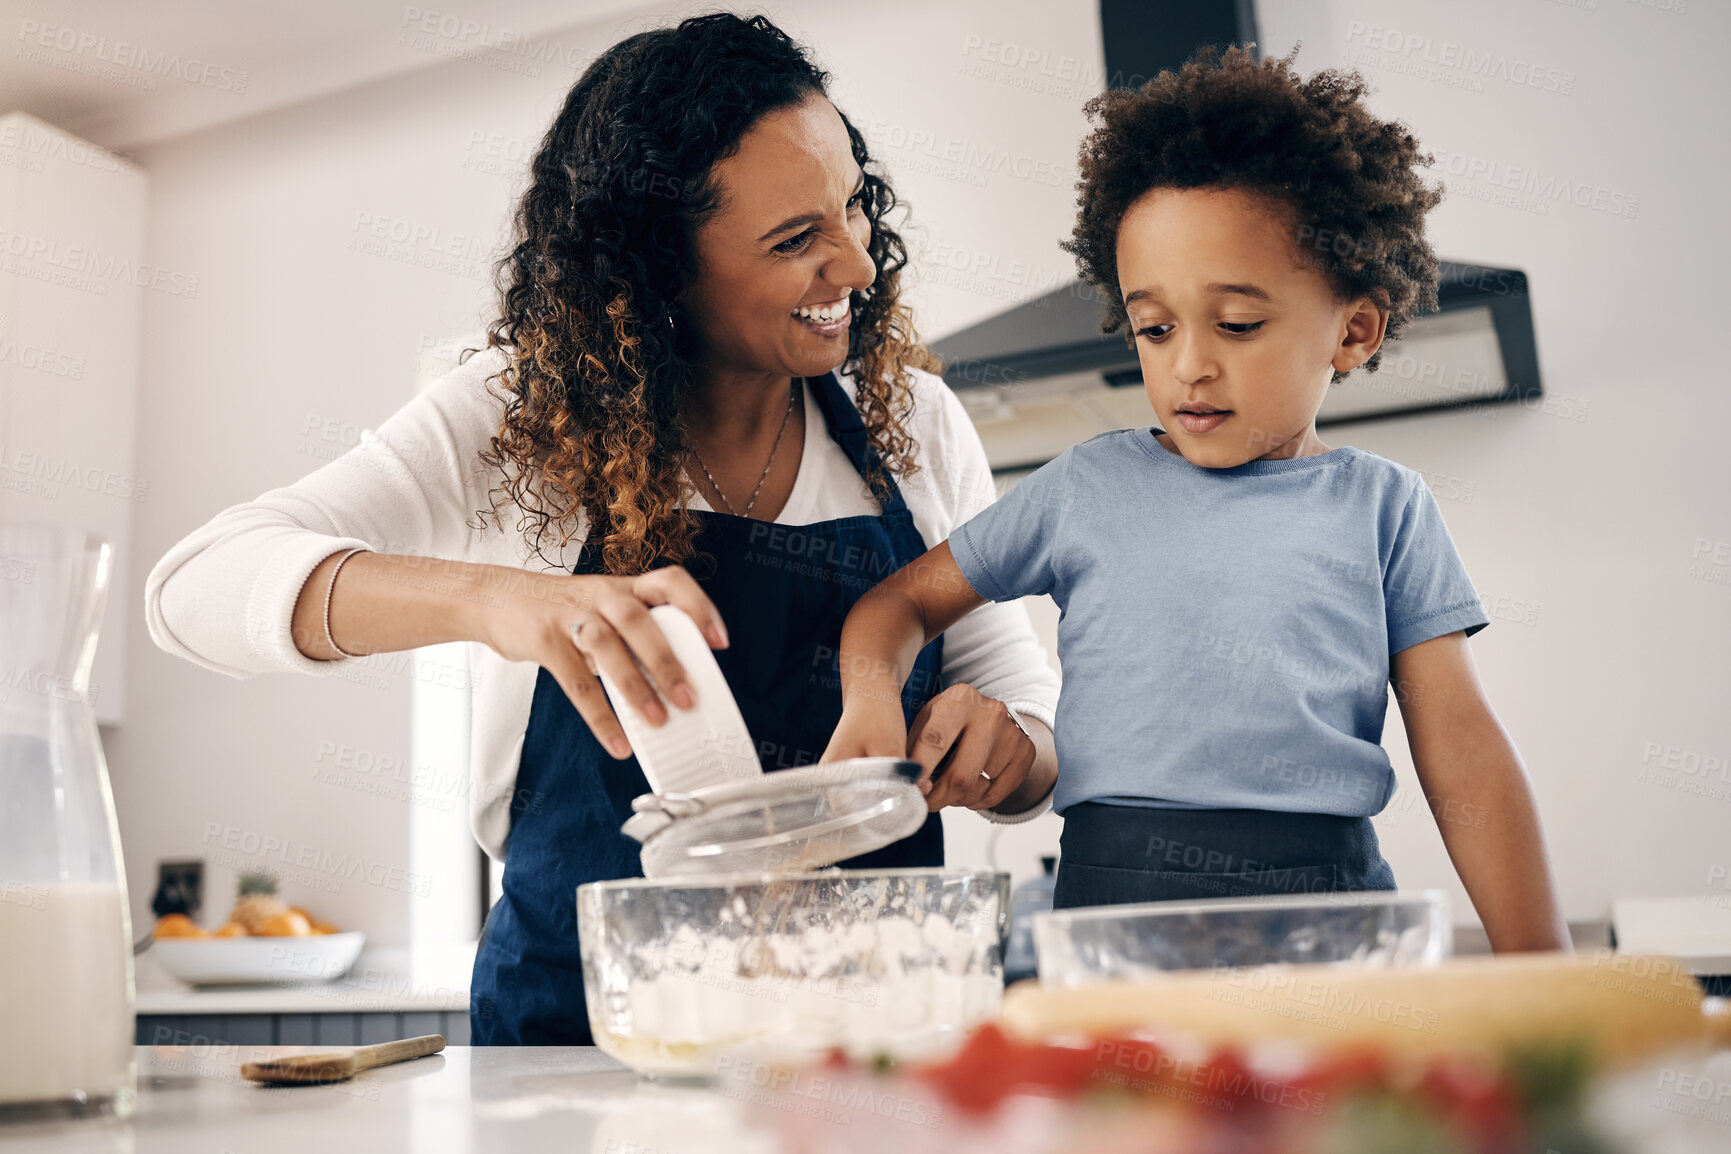 Buy stock photo Adorable little boy with afro baking in the kitchen at home with his mom. Cheerful mixed race woman sifting flour and mixing ingredients with the help of her son. Baking is a bonding activity